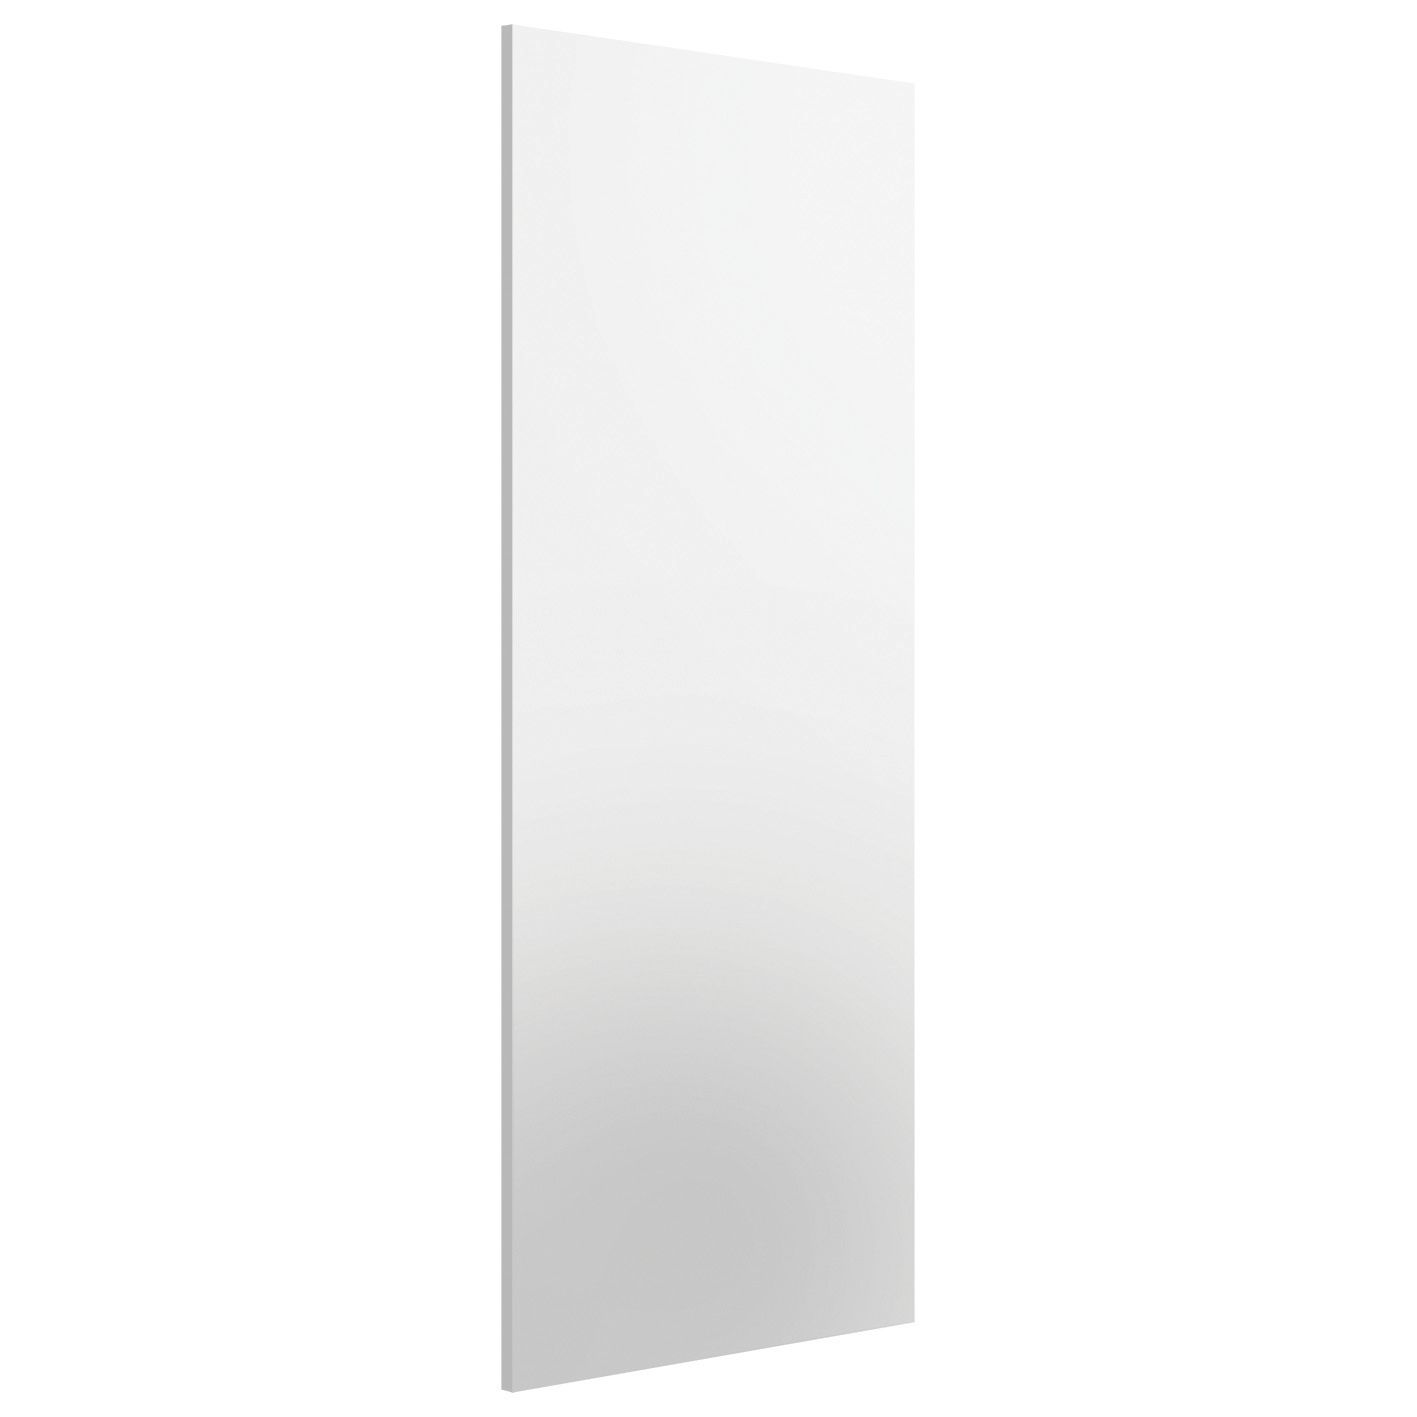 Image of Spacepro Wardrobe End Panel White - 2800mm x 620mm x 18mm with Fixing Blocks